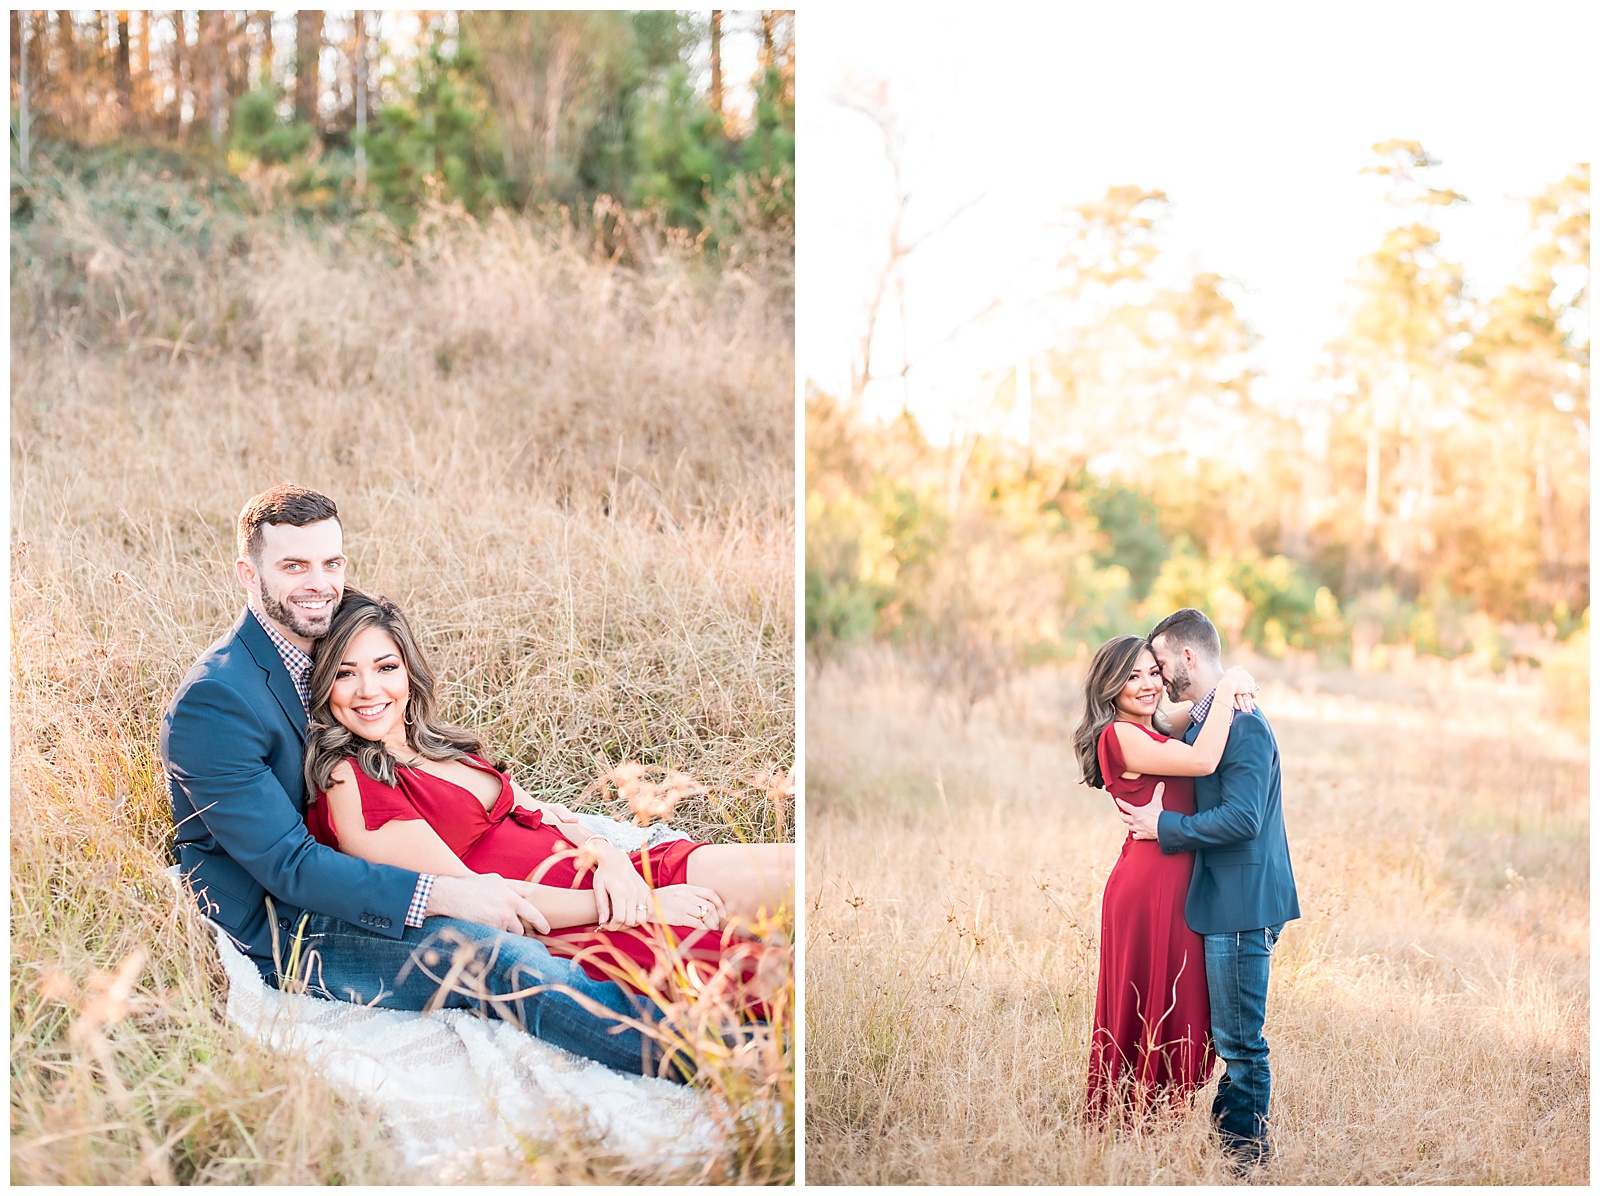 Engagement photography in The Woodlands, Texas 